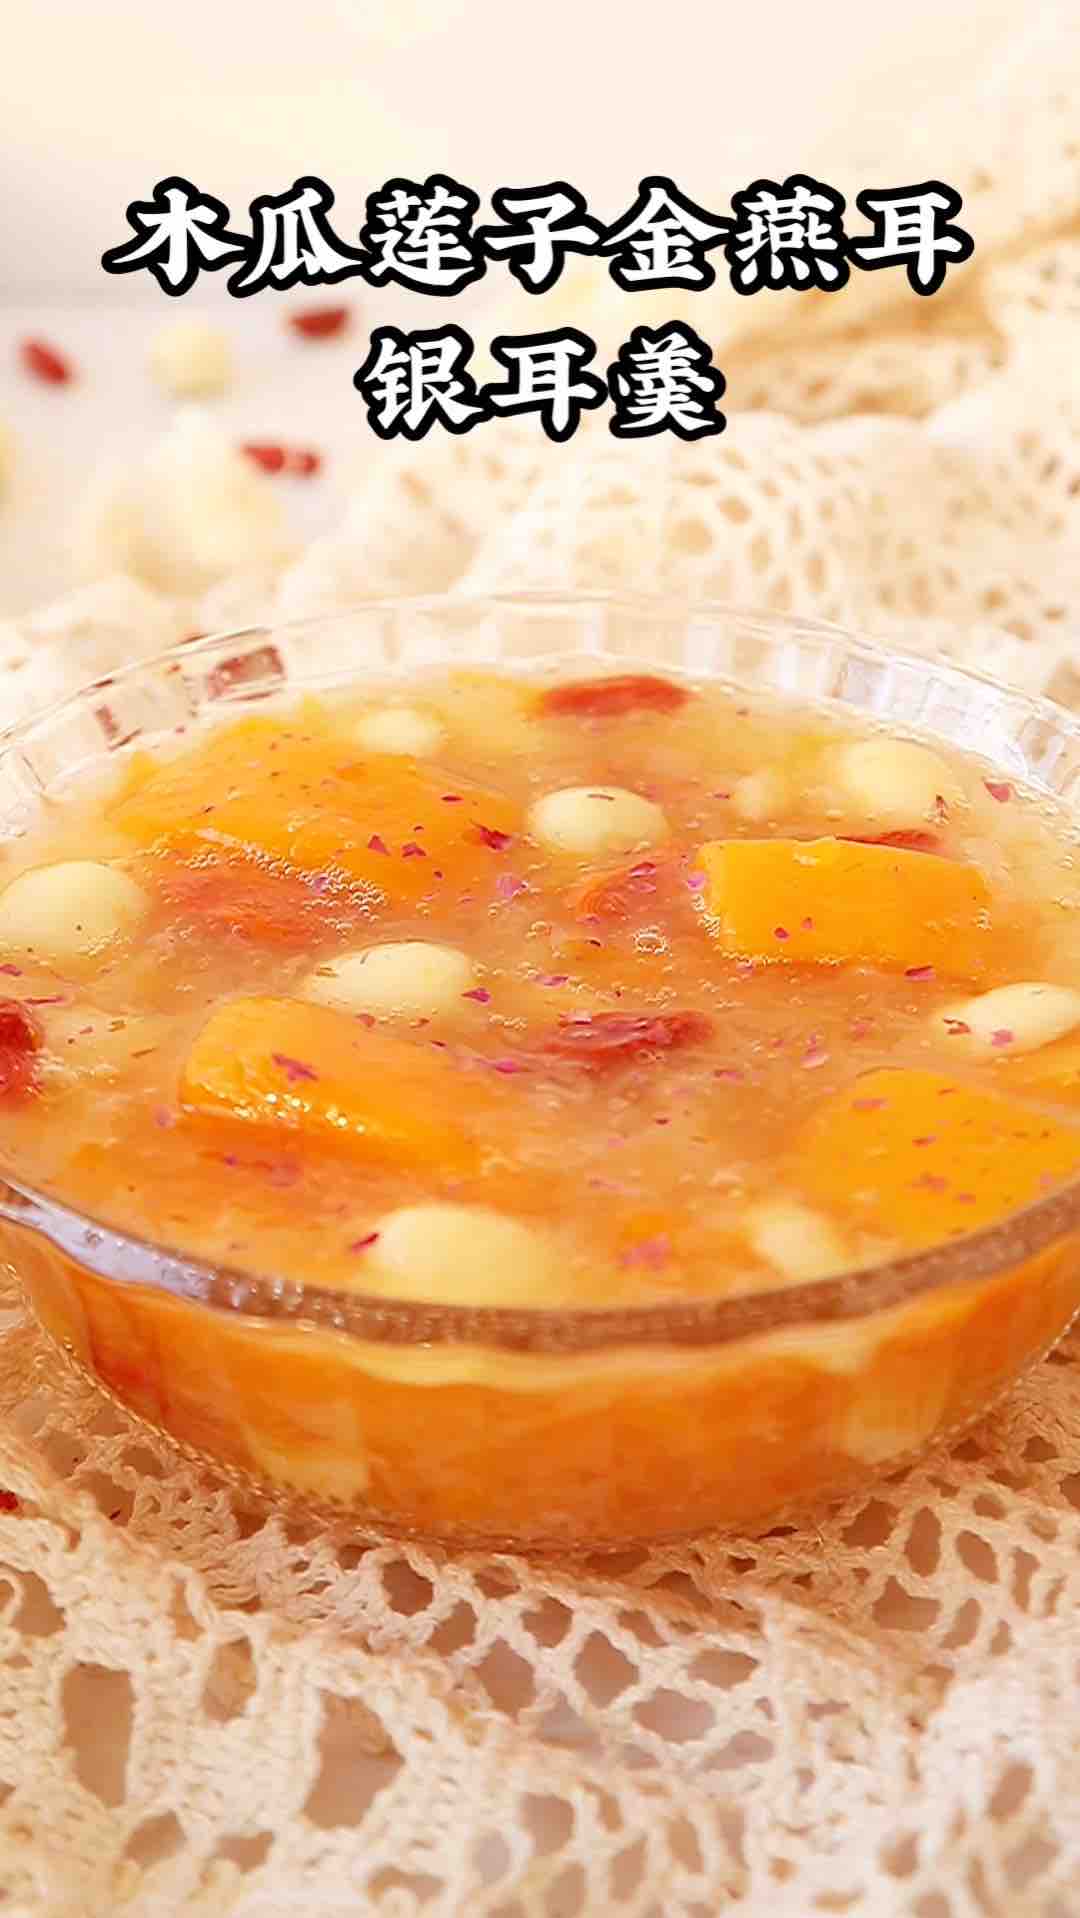 Papaya and Lotus Seed Golden Swallow Ear and White Fungus Soup recipe